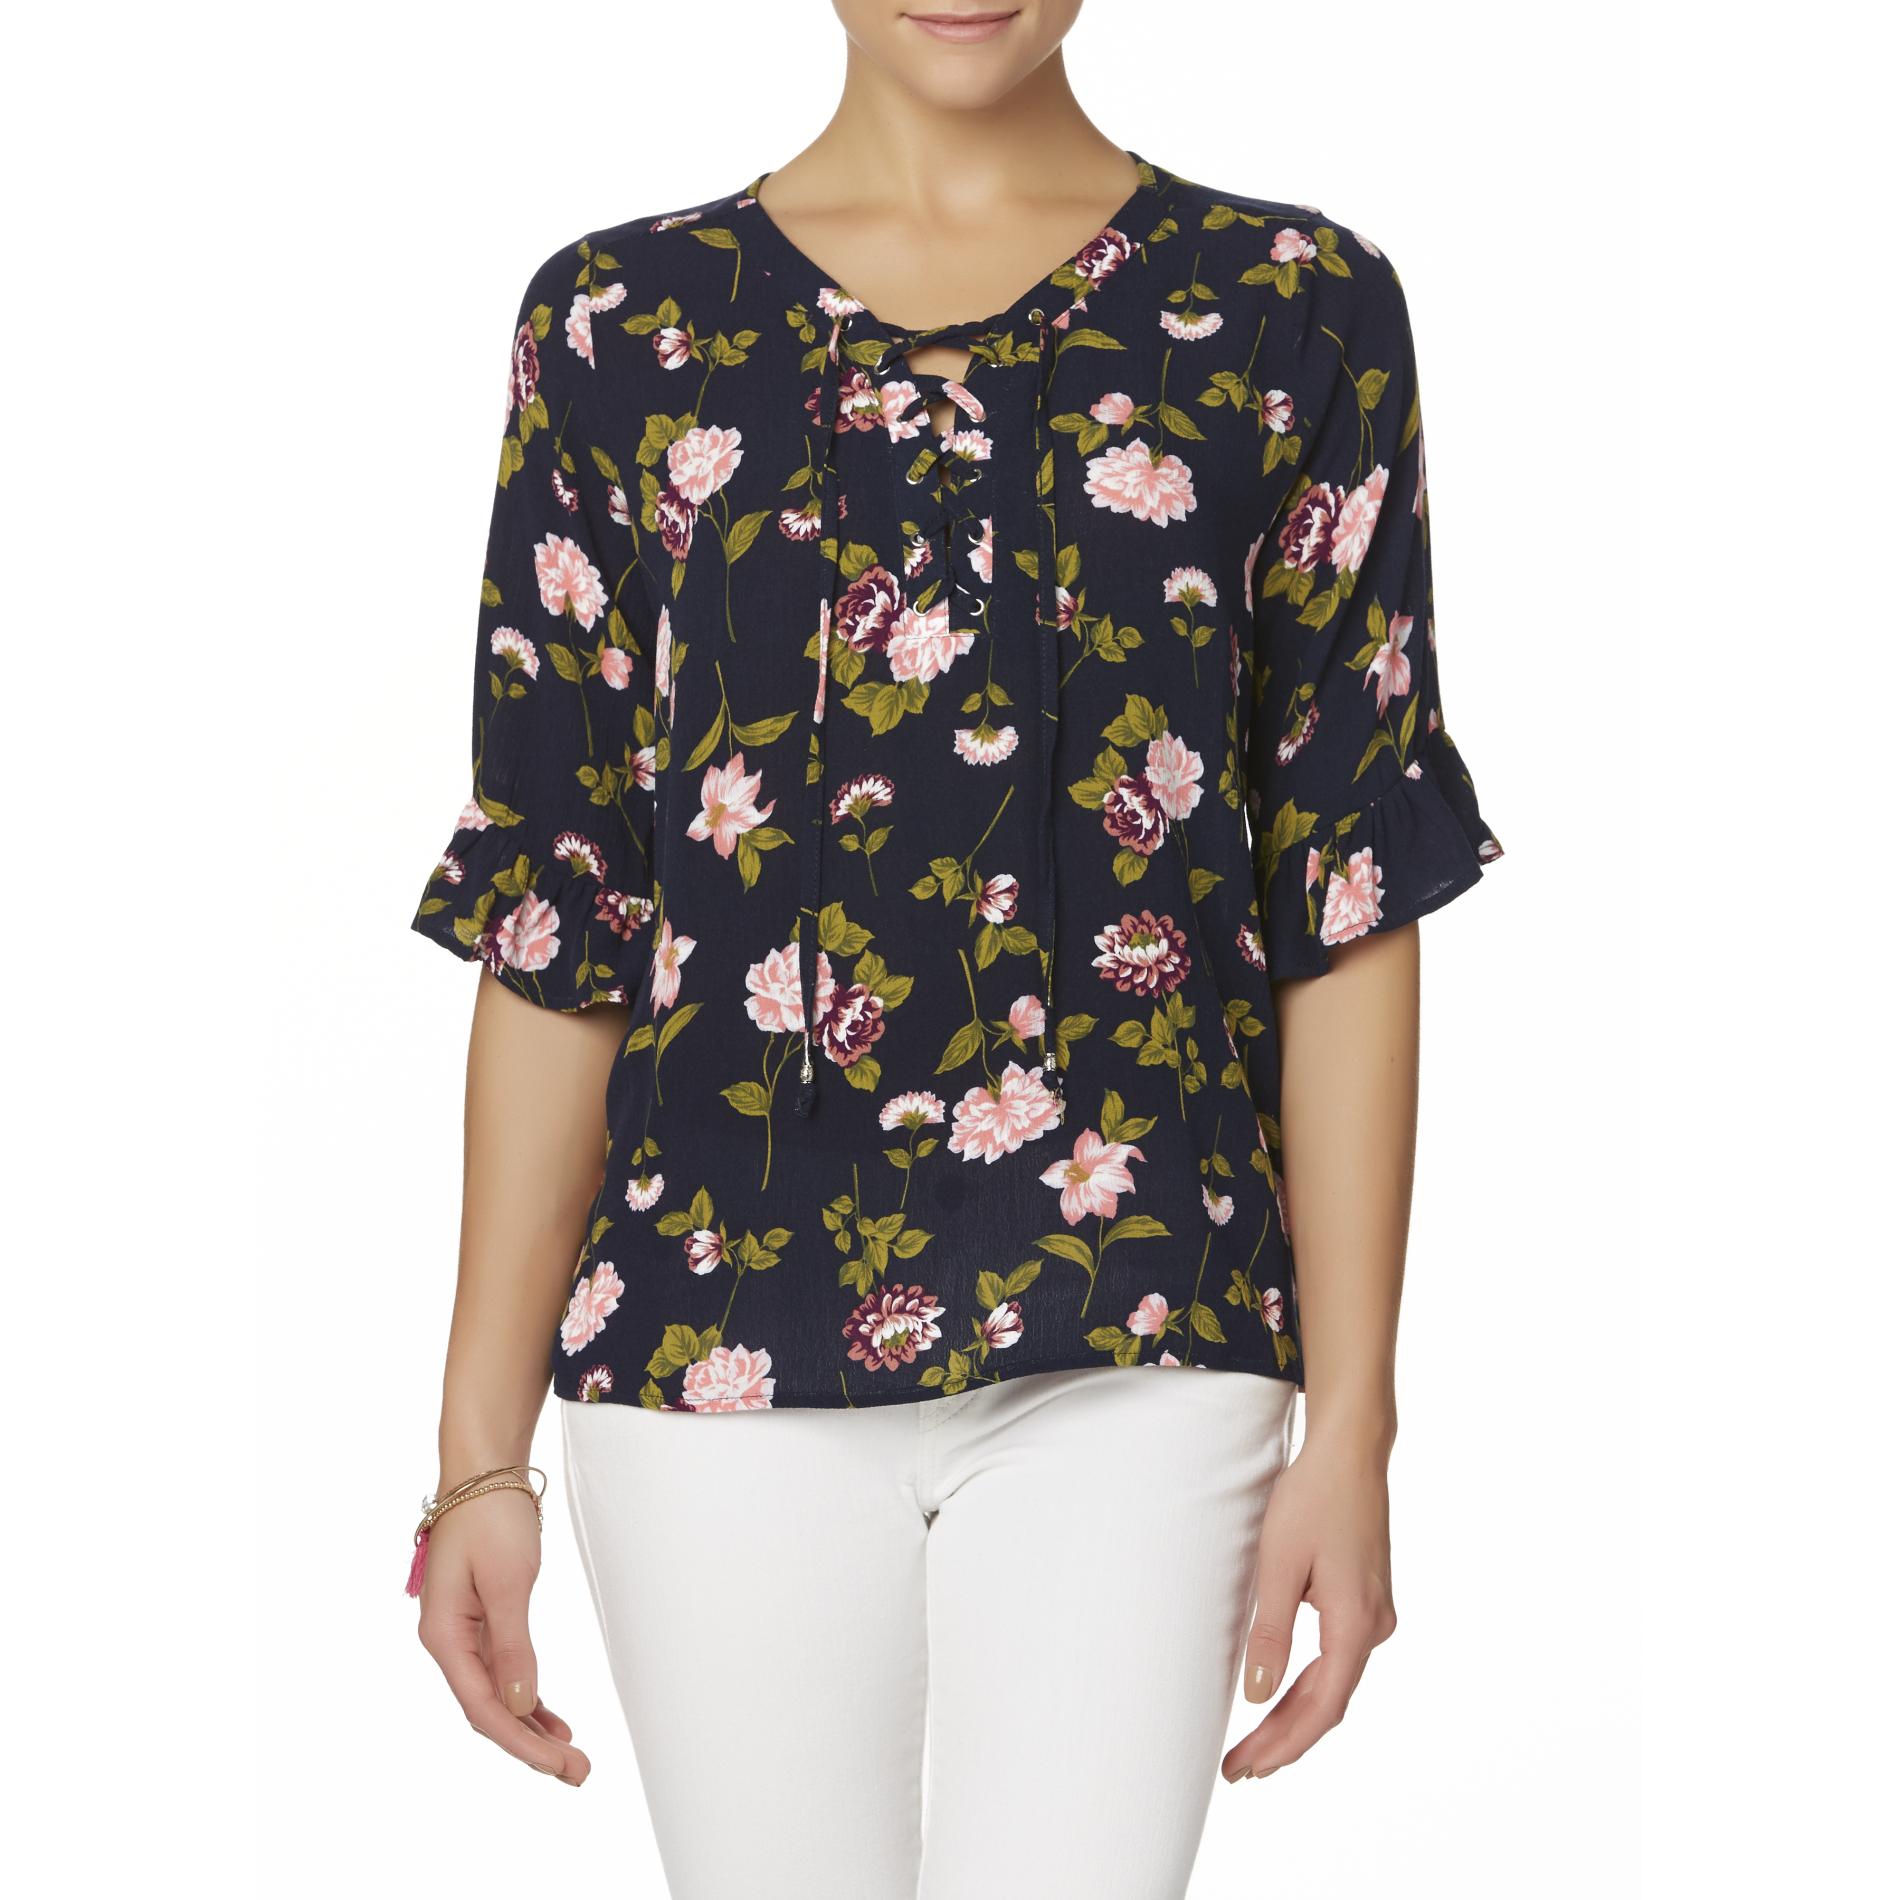 Cupids Diary Juniors' Lace-Up Top - Floral